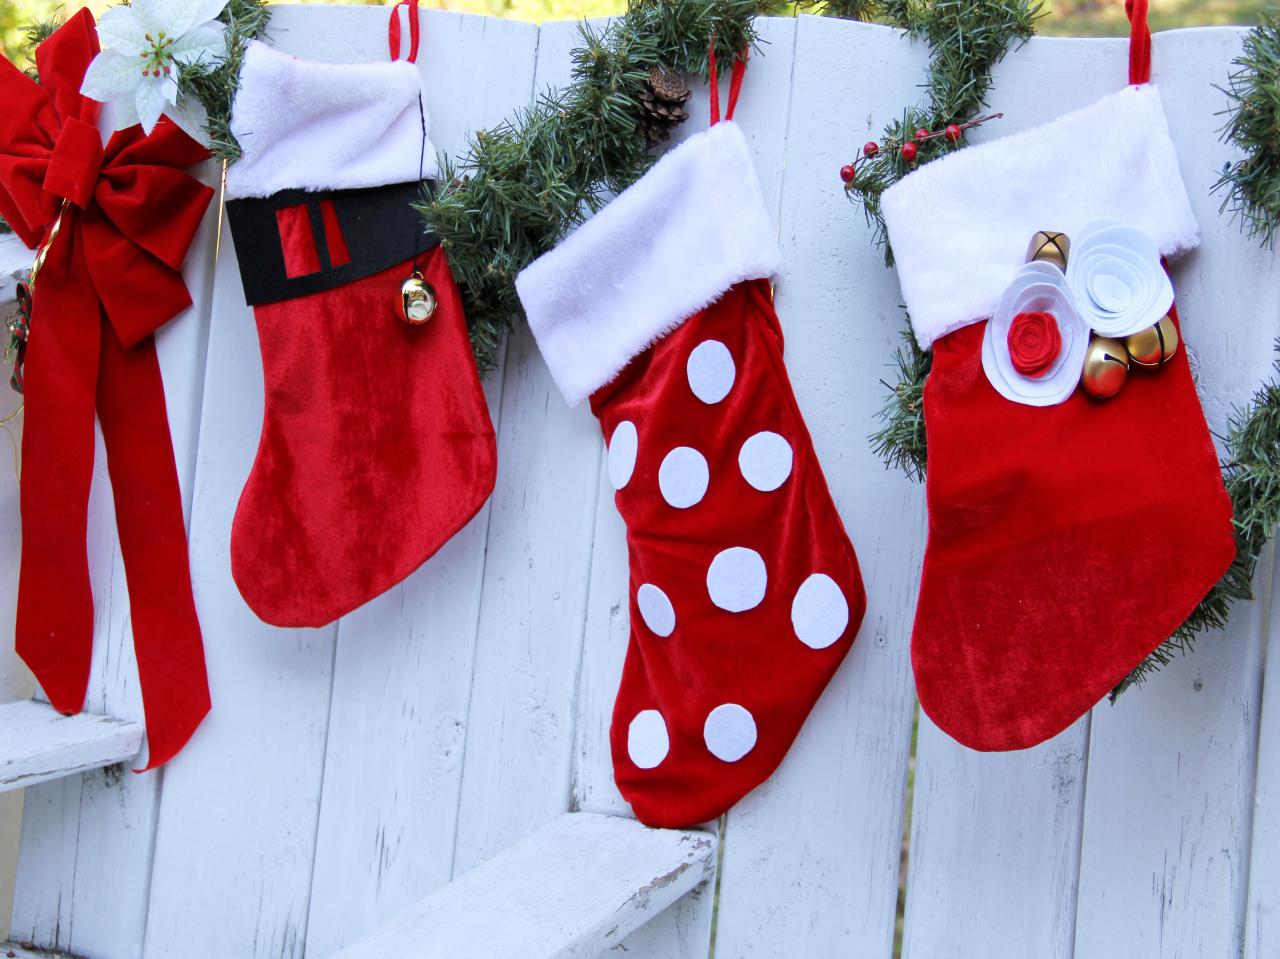 40 Wonderful Christmas Stockings Decoration Ideas - All About Christmas